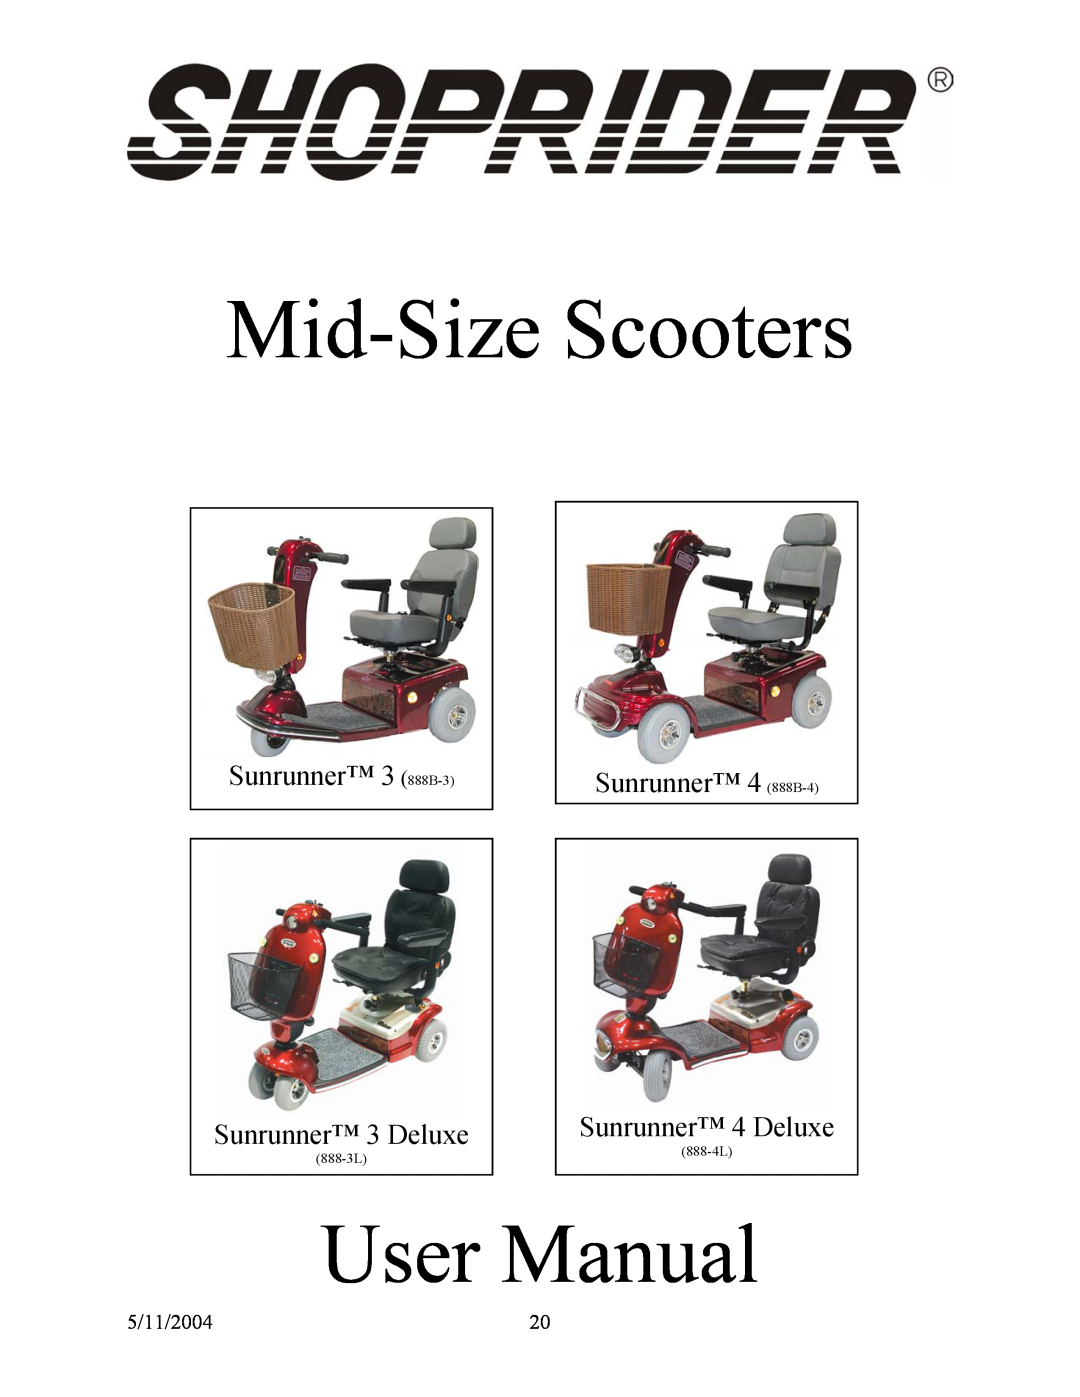 Shoprider (888B-3), (888-3L), (888B-4) Mid-Size Scooters, User Manual, Sunrunner 3 888B-3 Sunrunner 3 Deluxe, 888-4L 